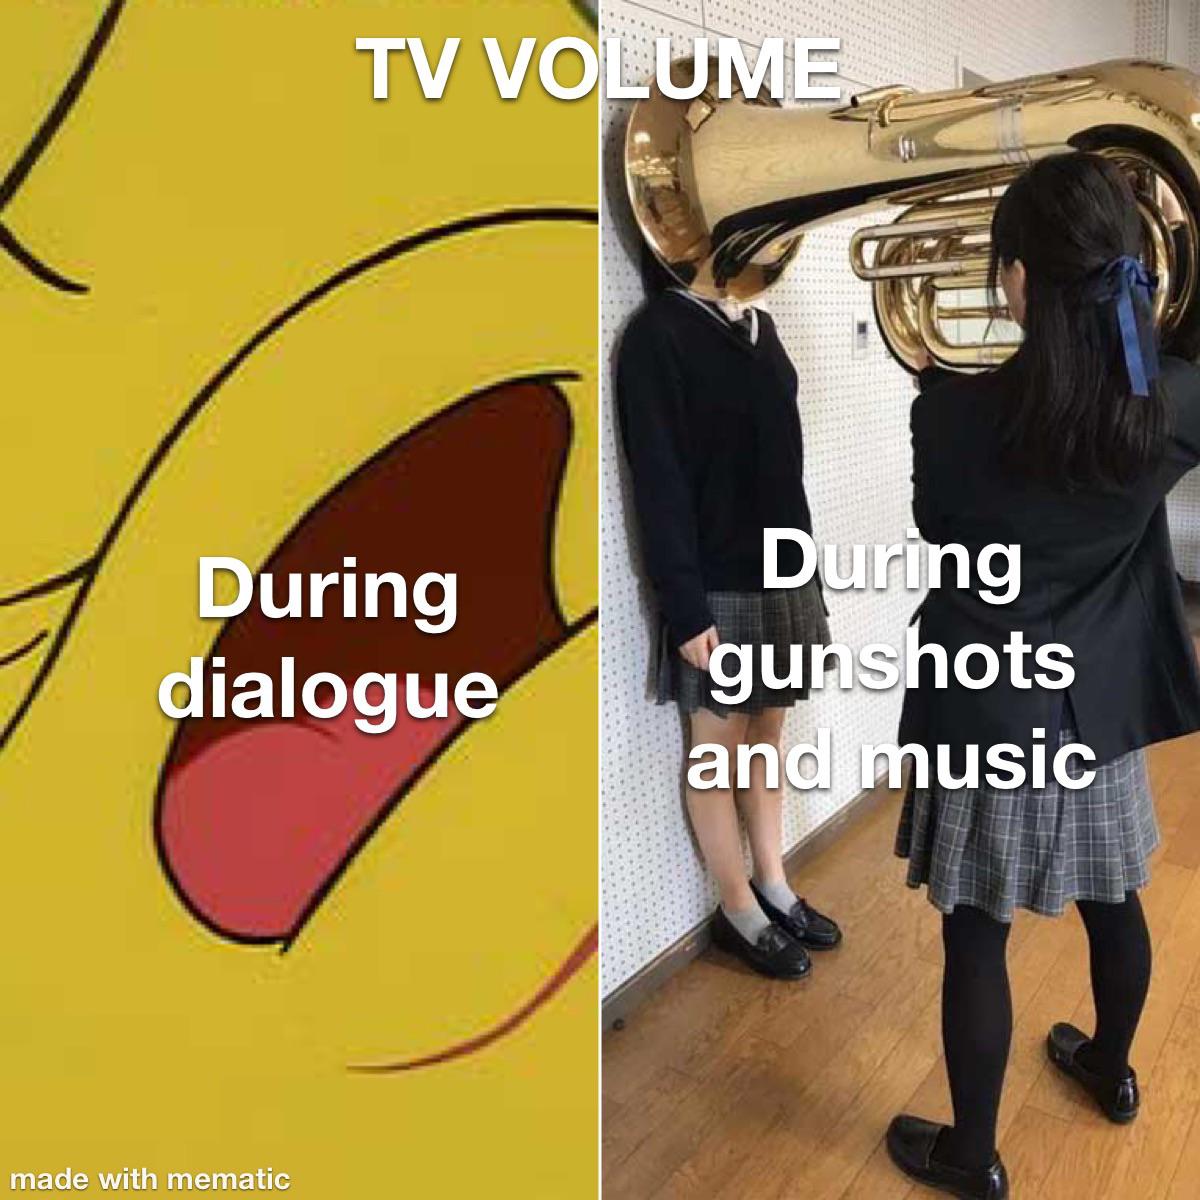 funny memes - girl putting tuba on girl's head template - Tv Volume, During dialogue made with mematic During gunshots and music